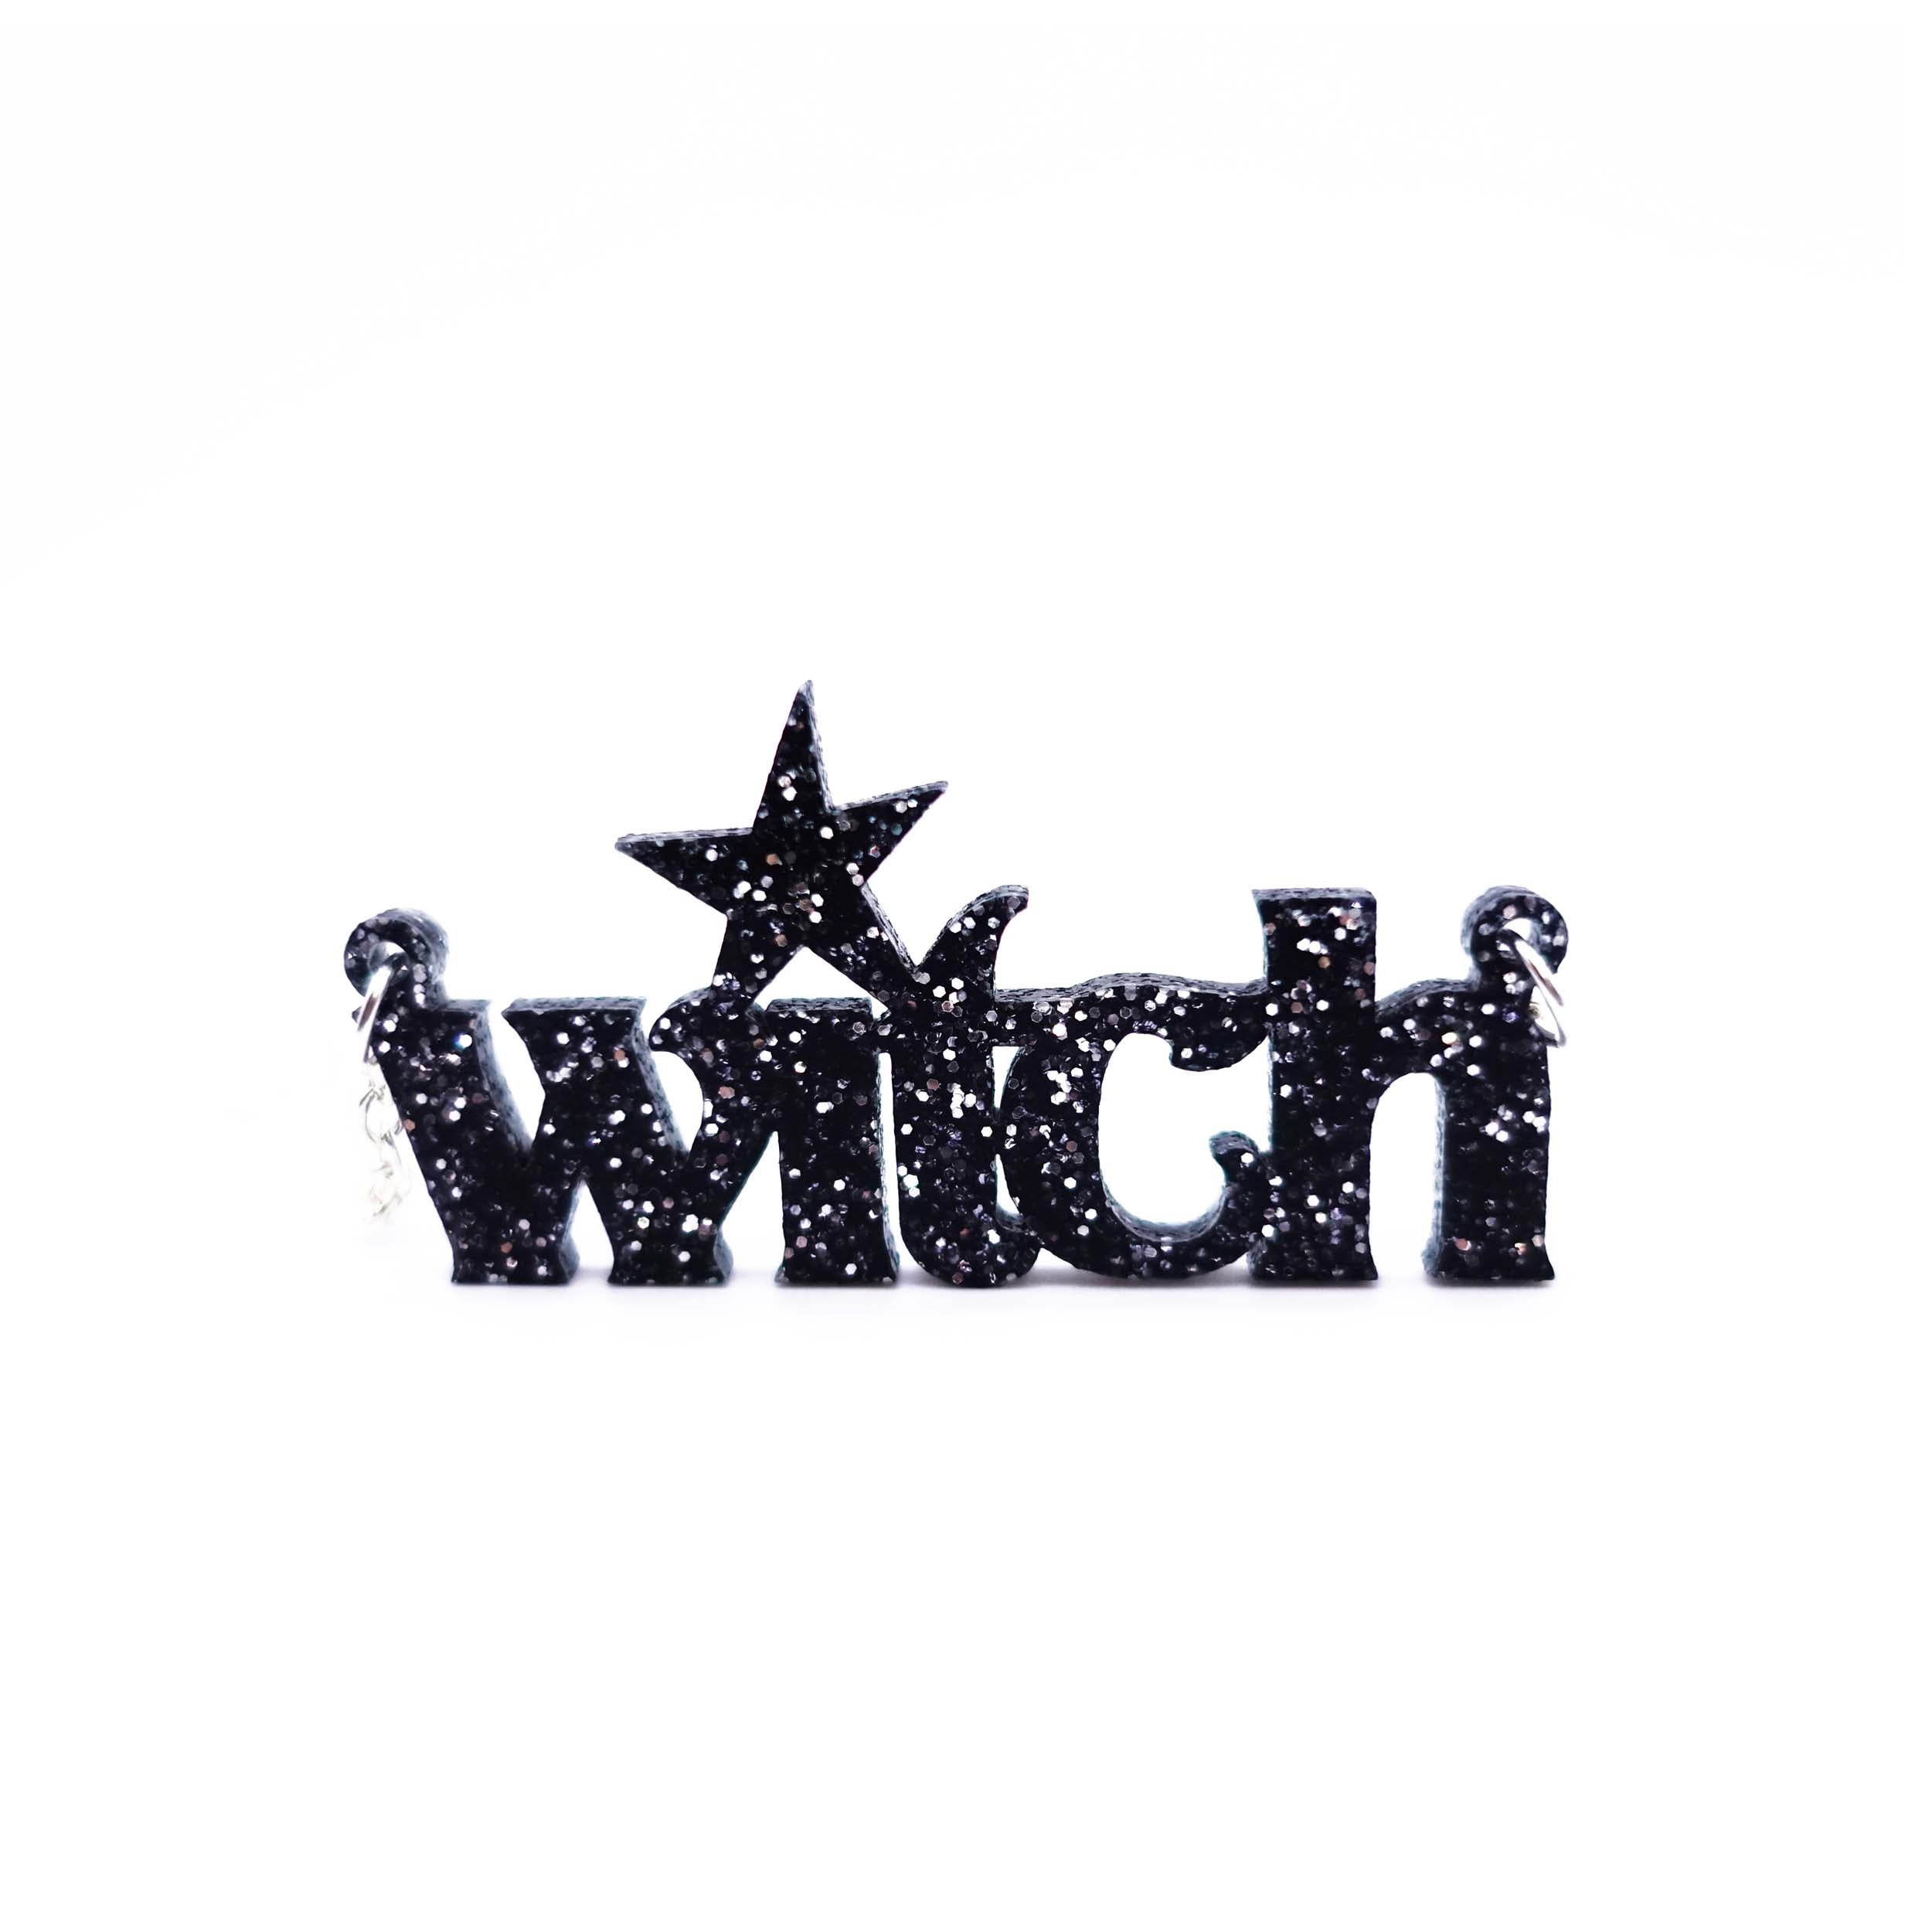 Witch necklace in black glitter celebrating the power of magical women! Designed by Sarah Day for Wear and Resist. Supporting women's charities since 2017. 